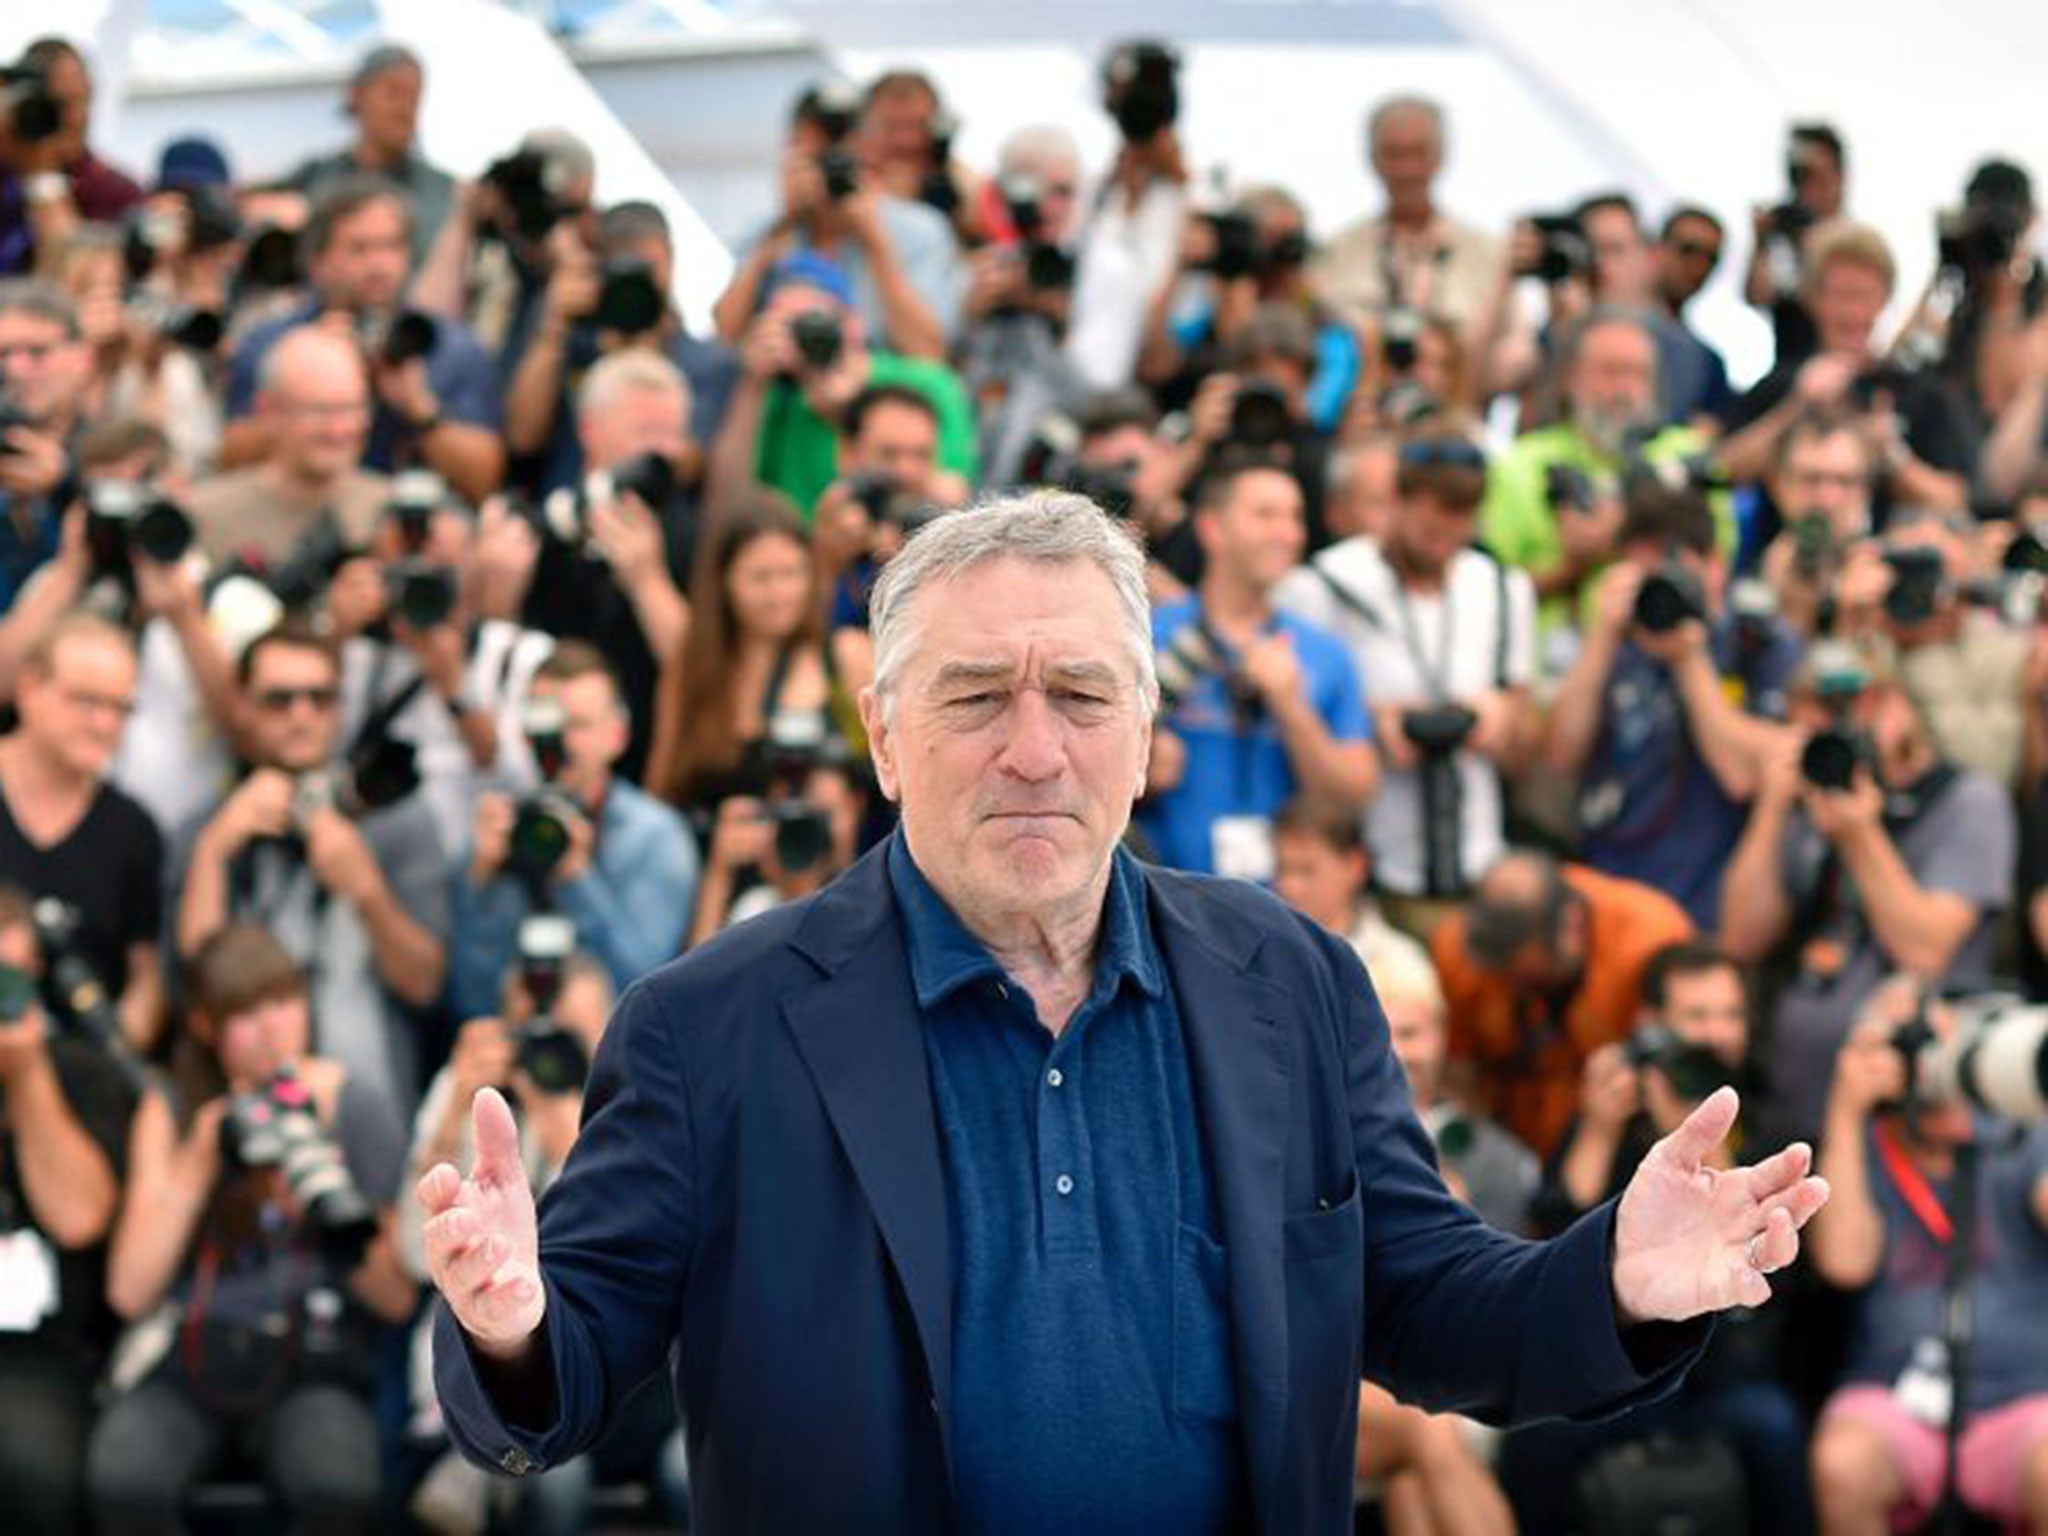 Actor Robert De Niro gives a sneak peak of his performance in the film ‘Hands of Stone’ at Cannes Film Festival yesterday